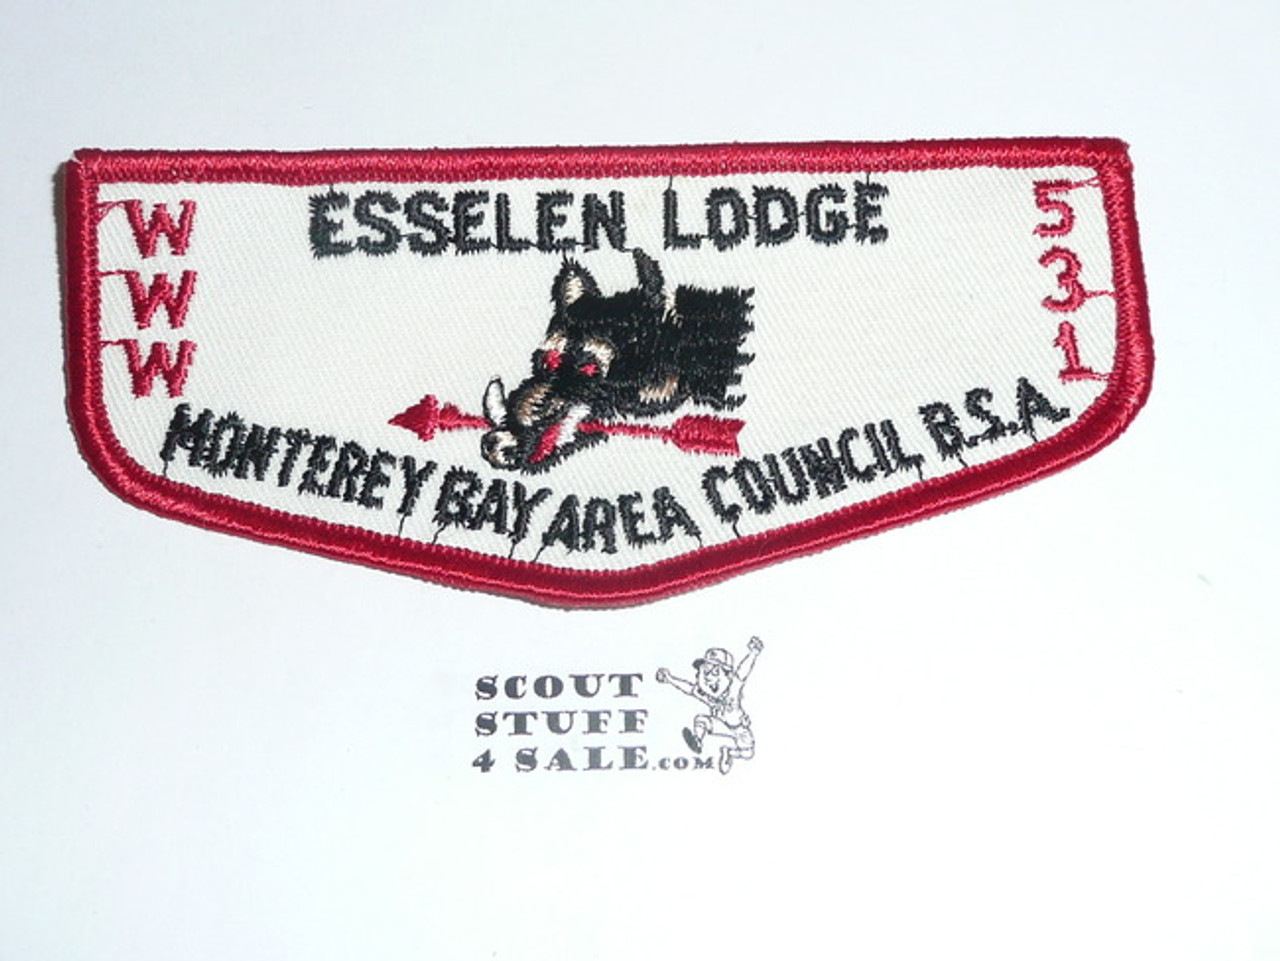 Order of the Arrow Lodge #531 Esselen f1a First Flap Patch